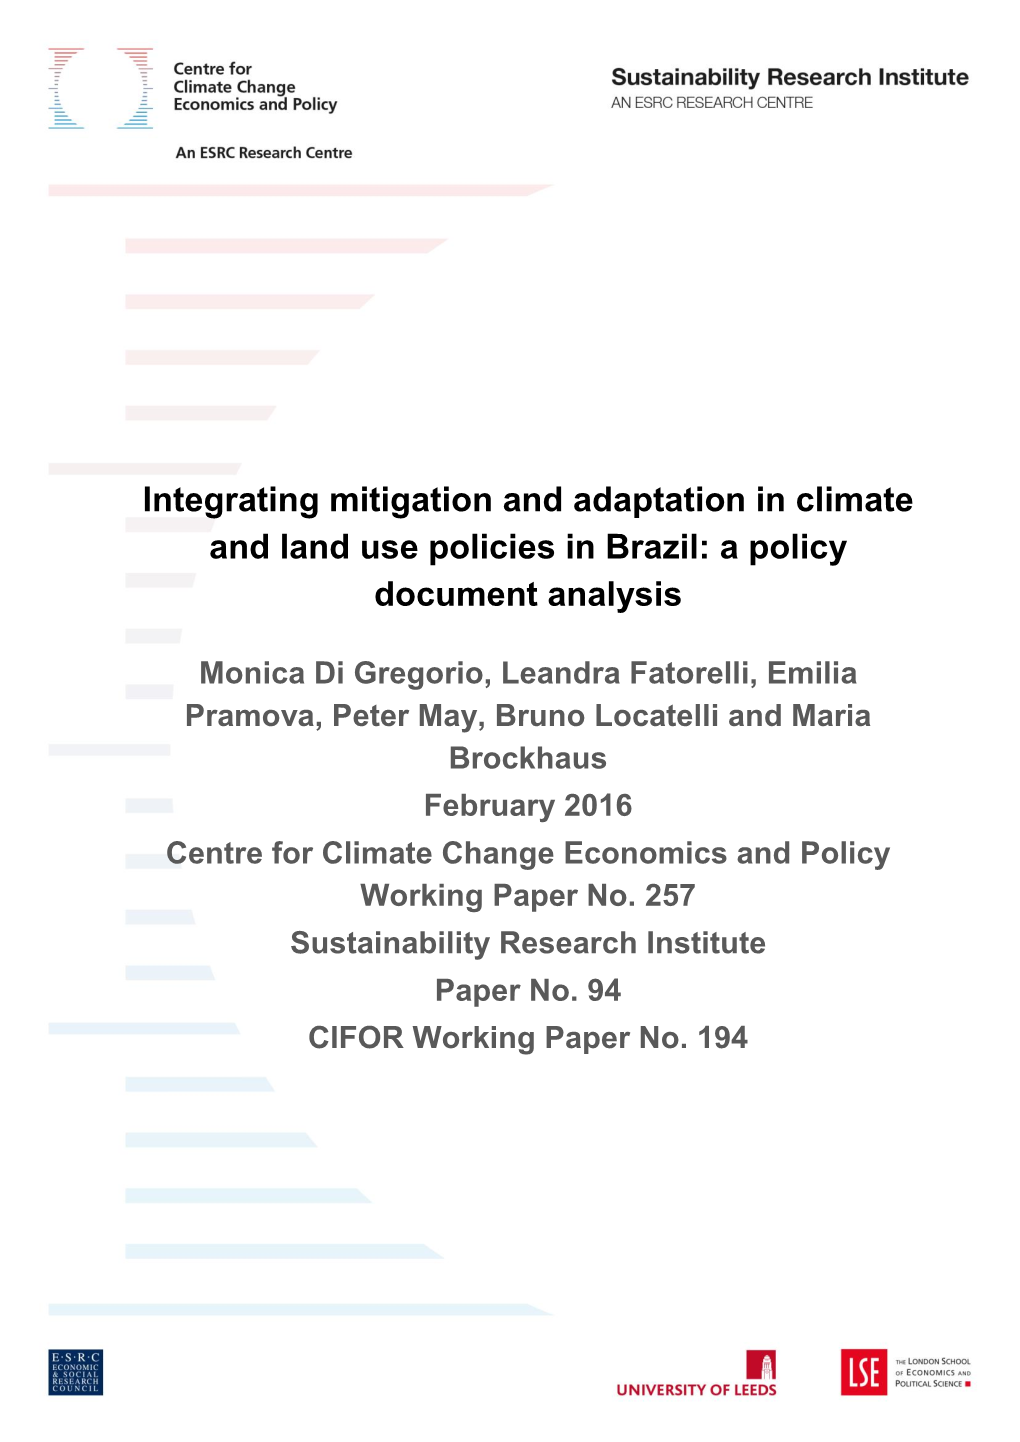 Integrating Mitigation and Adaptation in Climate and Land Use Policies in Brazil: a Policy Document Analysis